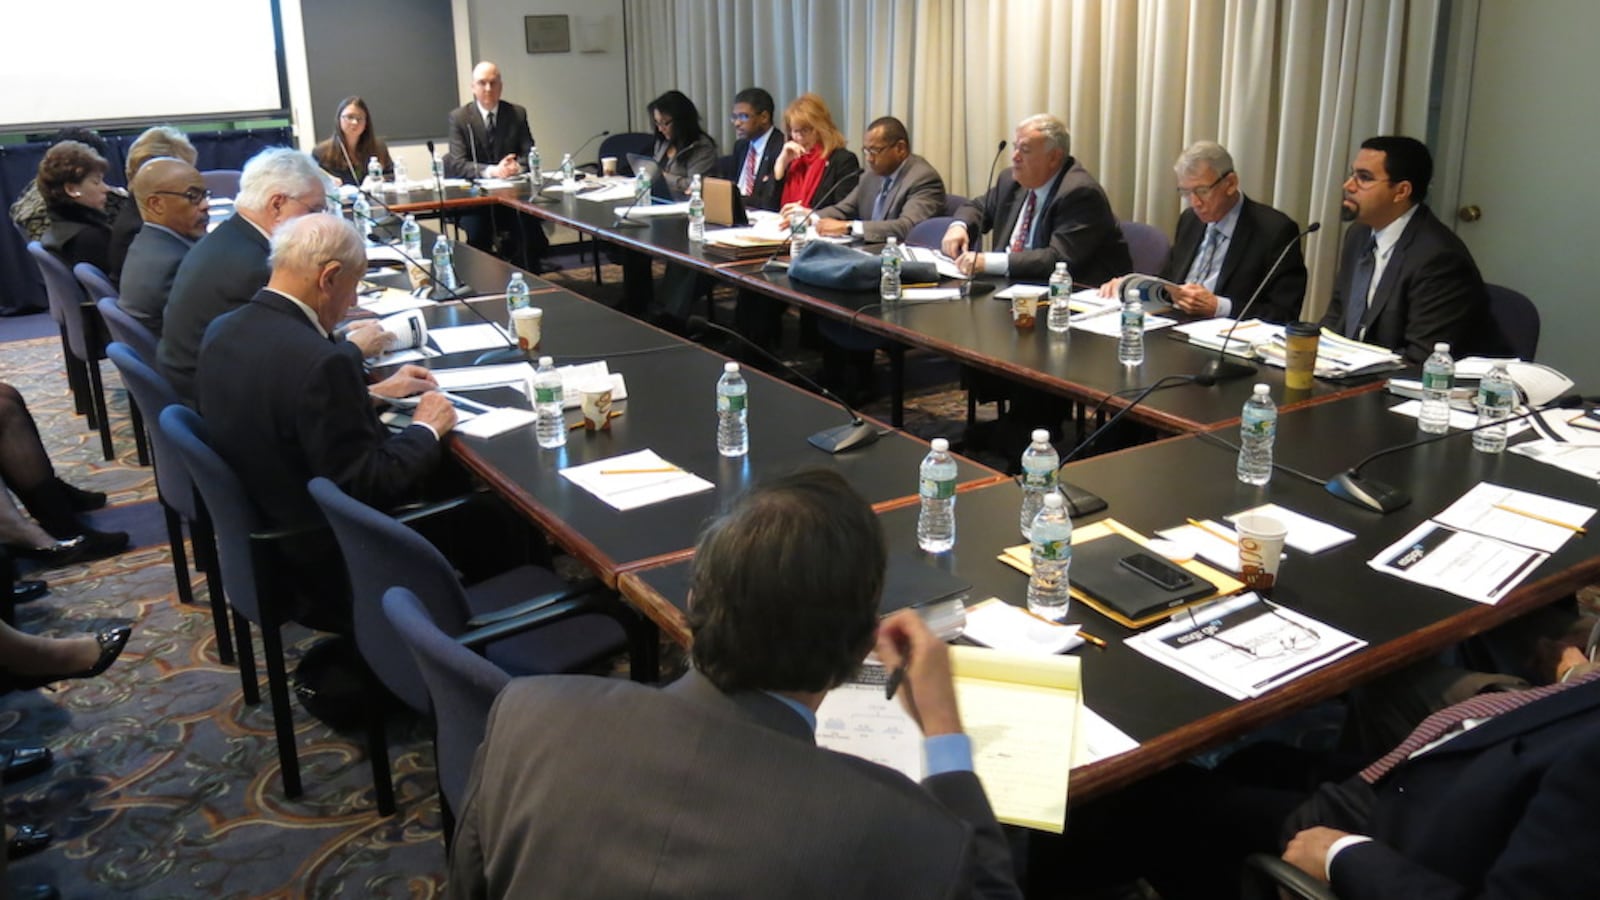 Board of Regents and State Education officials in a meeting  in Albany.